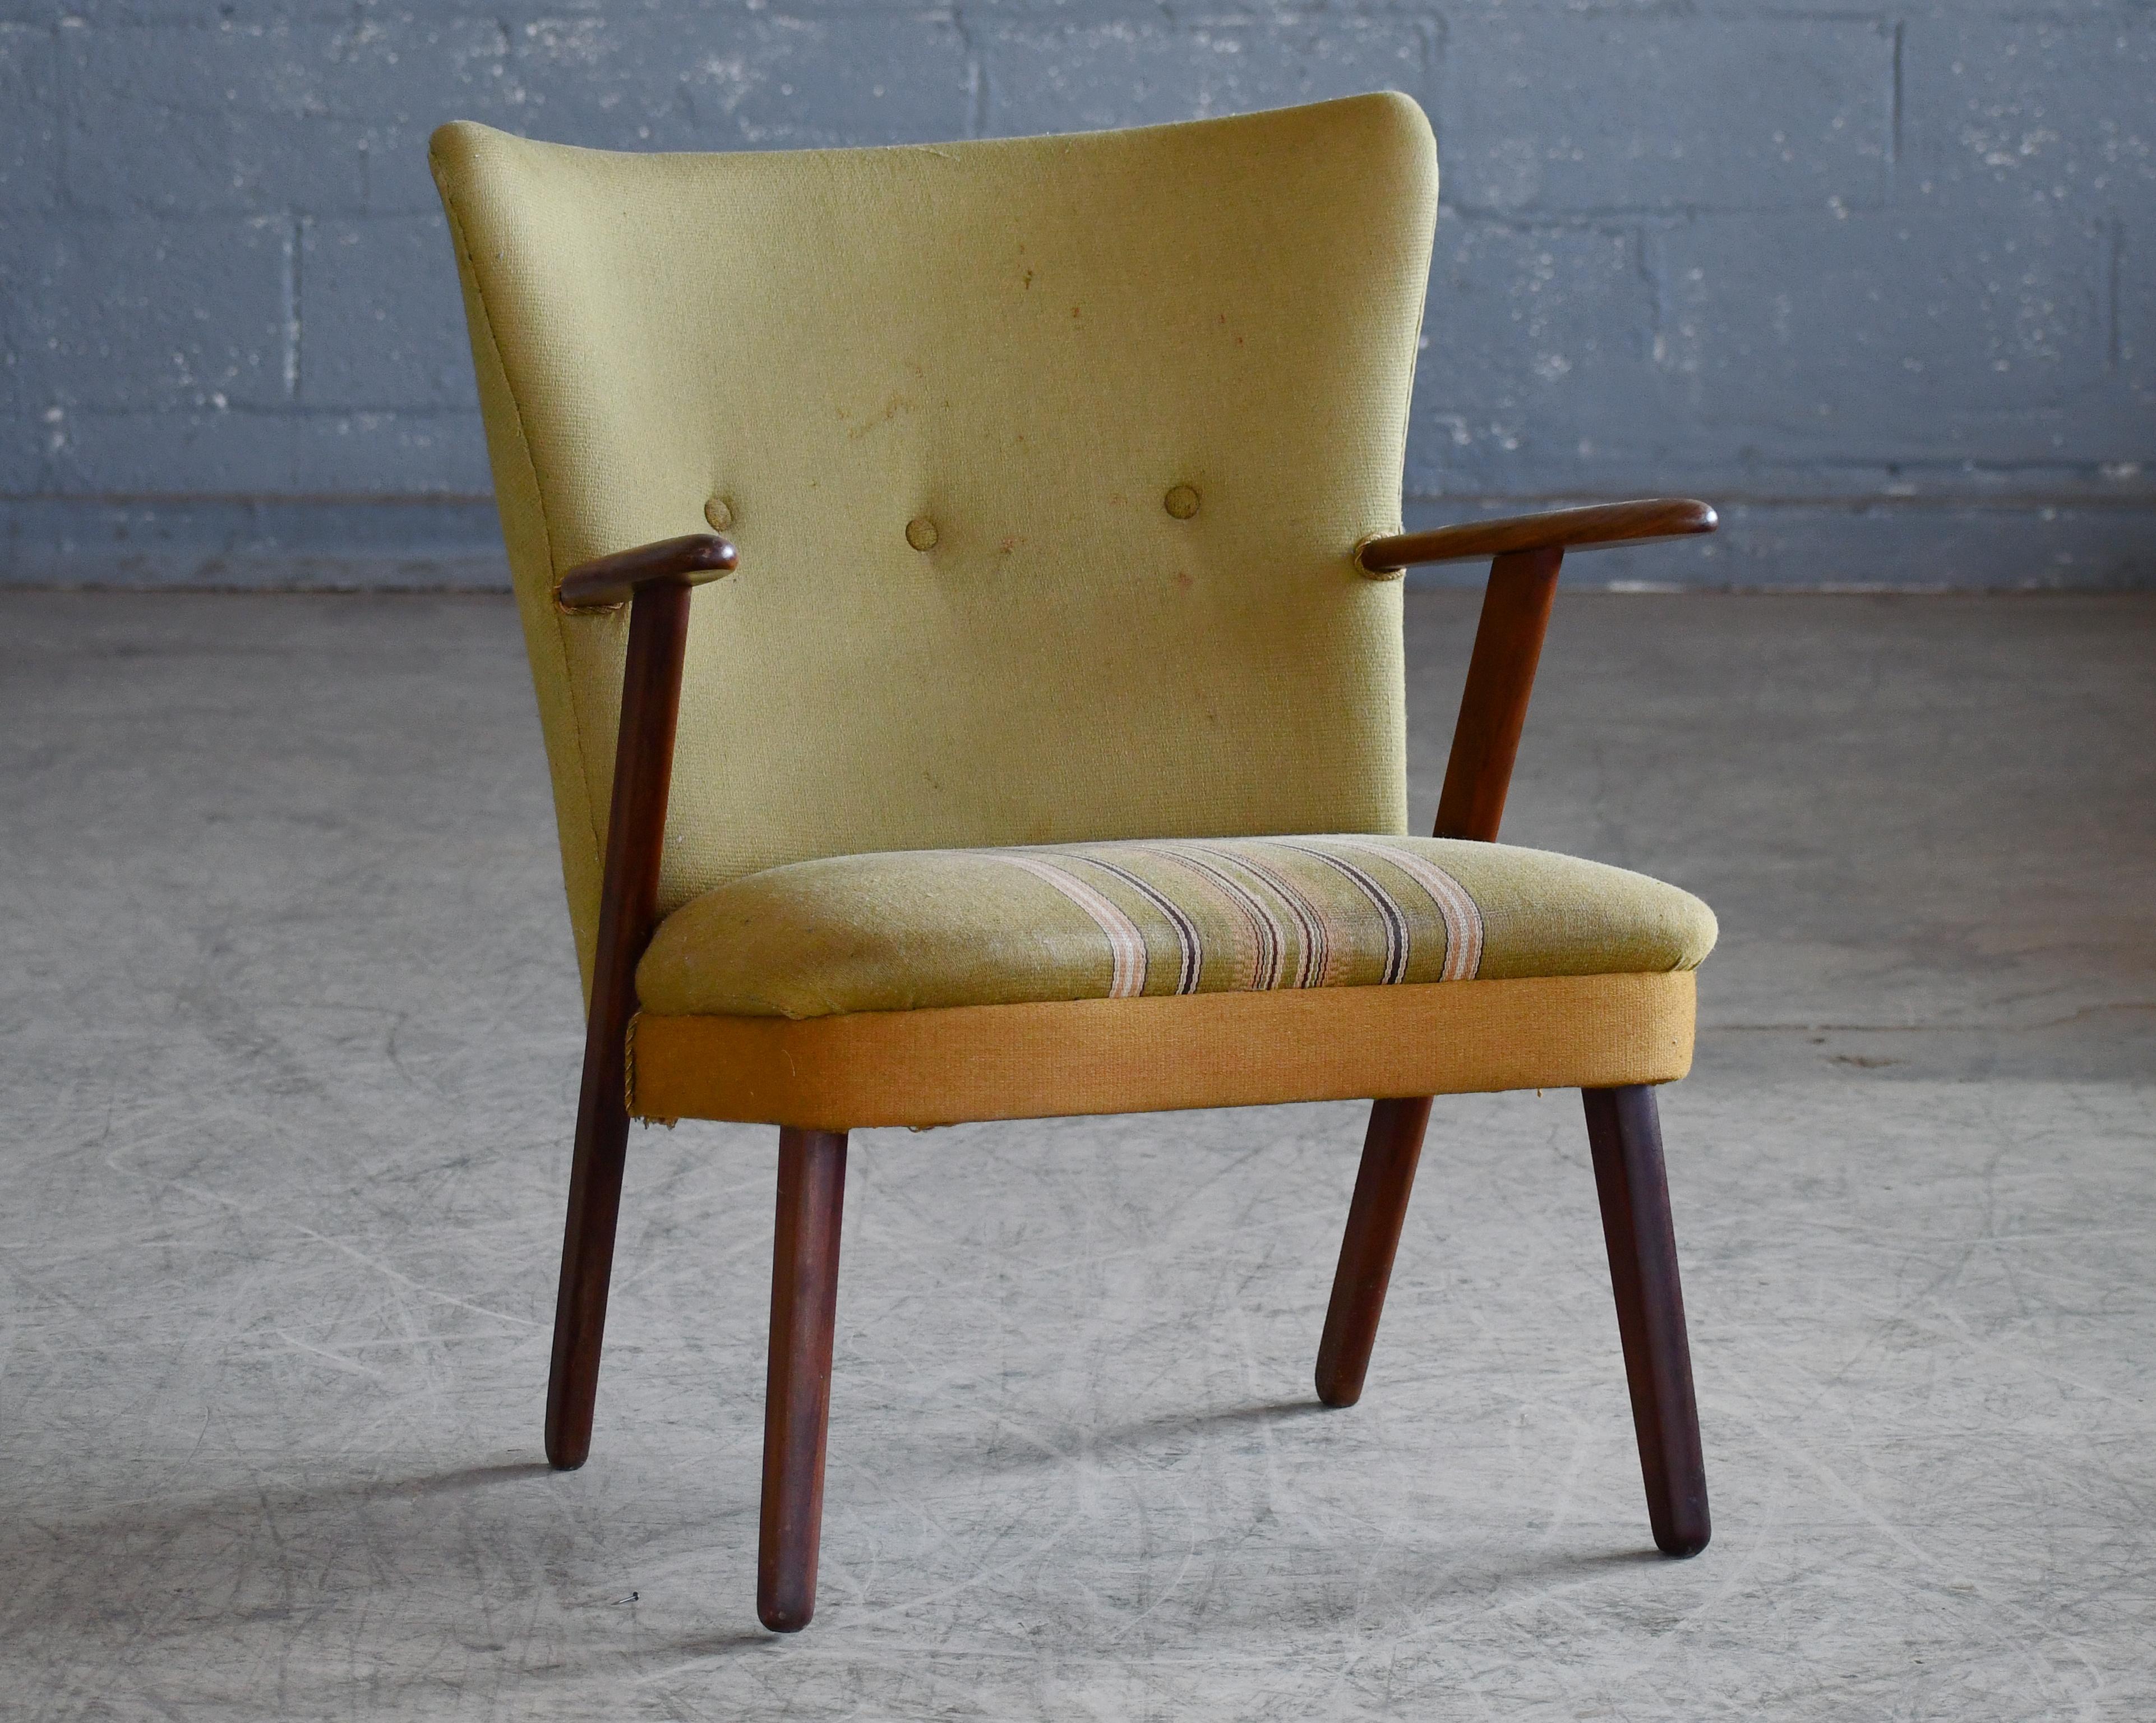 Very cool Danish mid-century armchair in teak covered in wool and very representative of the easy chairs of the time designed by such icons as Arne Vodder and Hans Wegner. Made by Erhardsen &Andersen in the 1950's. Frame is built into the seat and